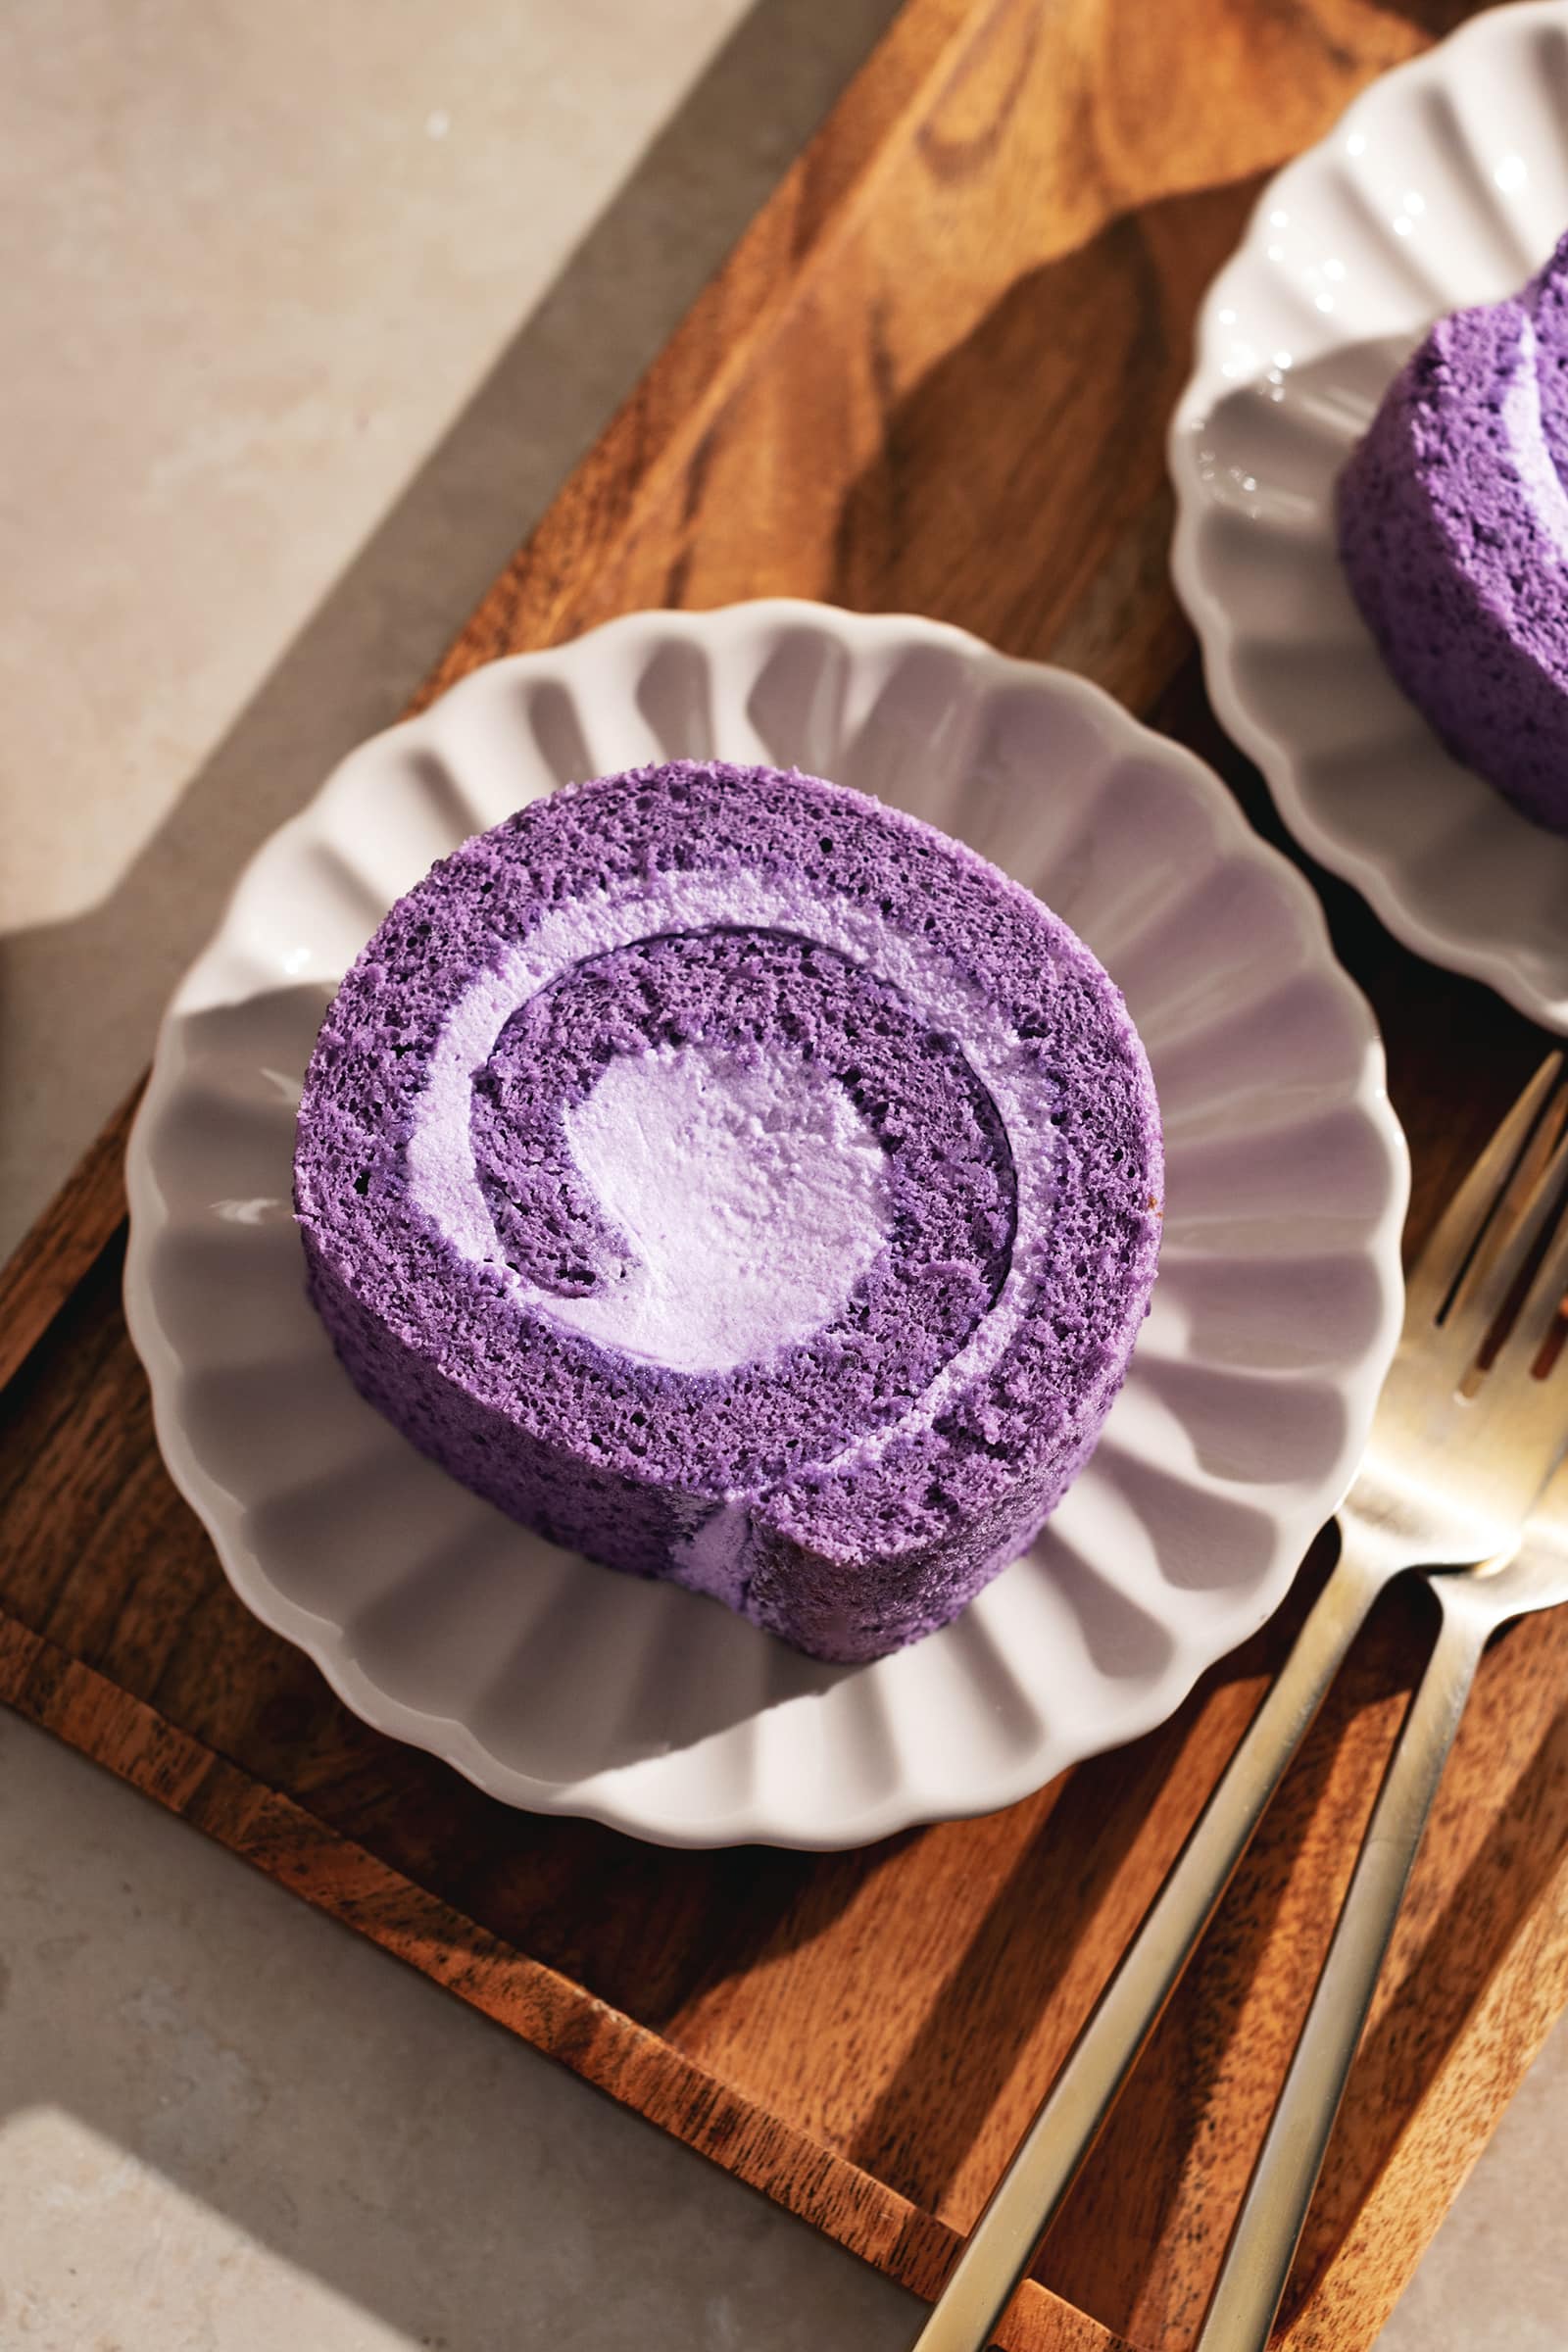 Top down view of a slice of ube roll cake on a scalloped plate on a wooden tray.